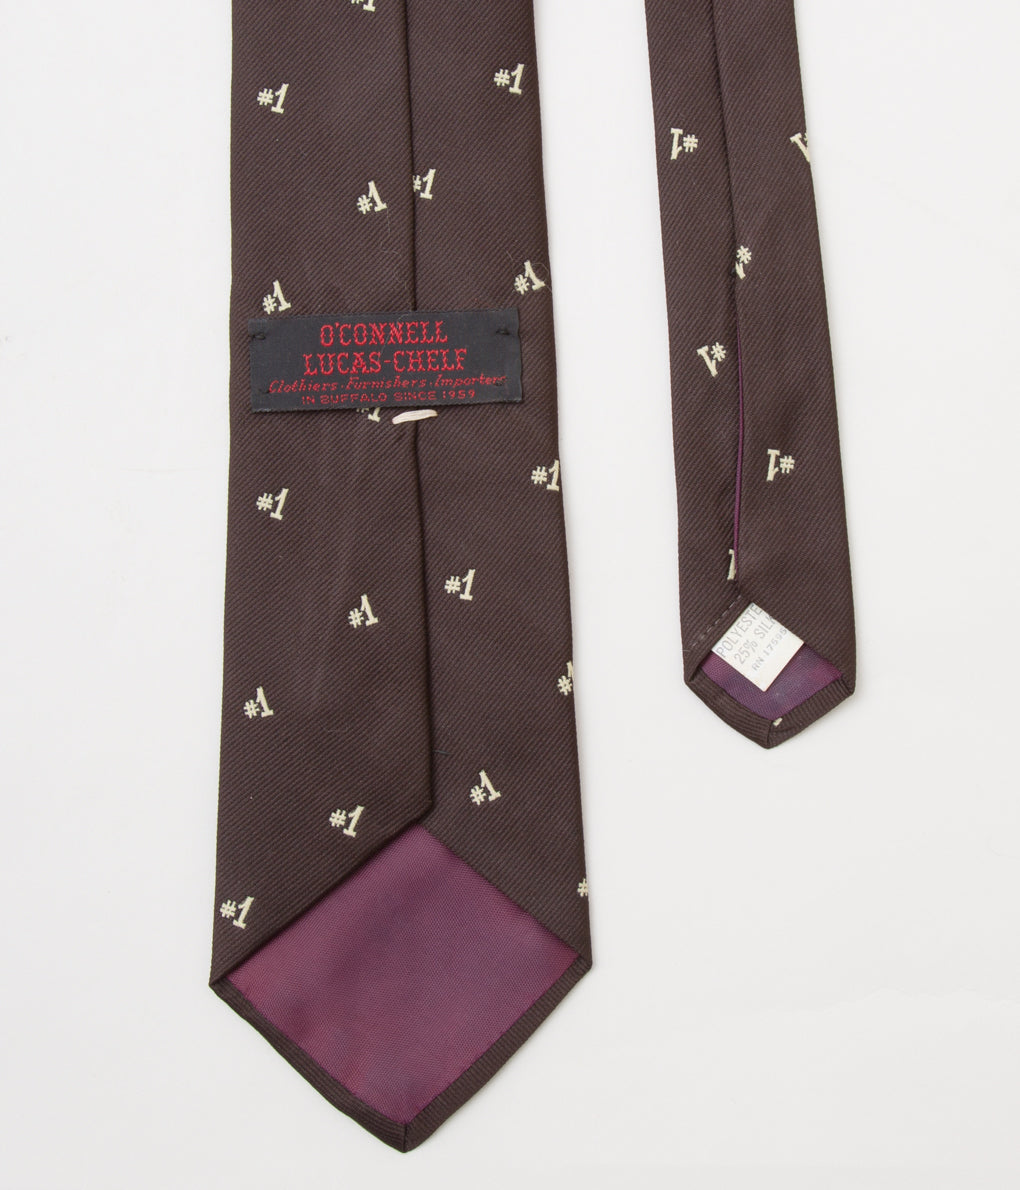 FROM USA "O'CONNELL LUCAS-CHELF EMBROIDERED TIE #1"(BROWN)